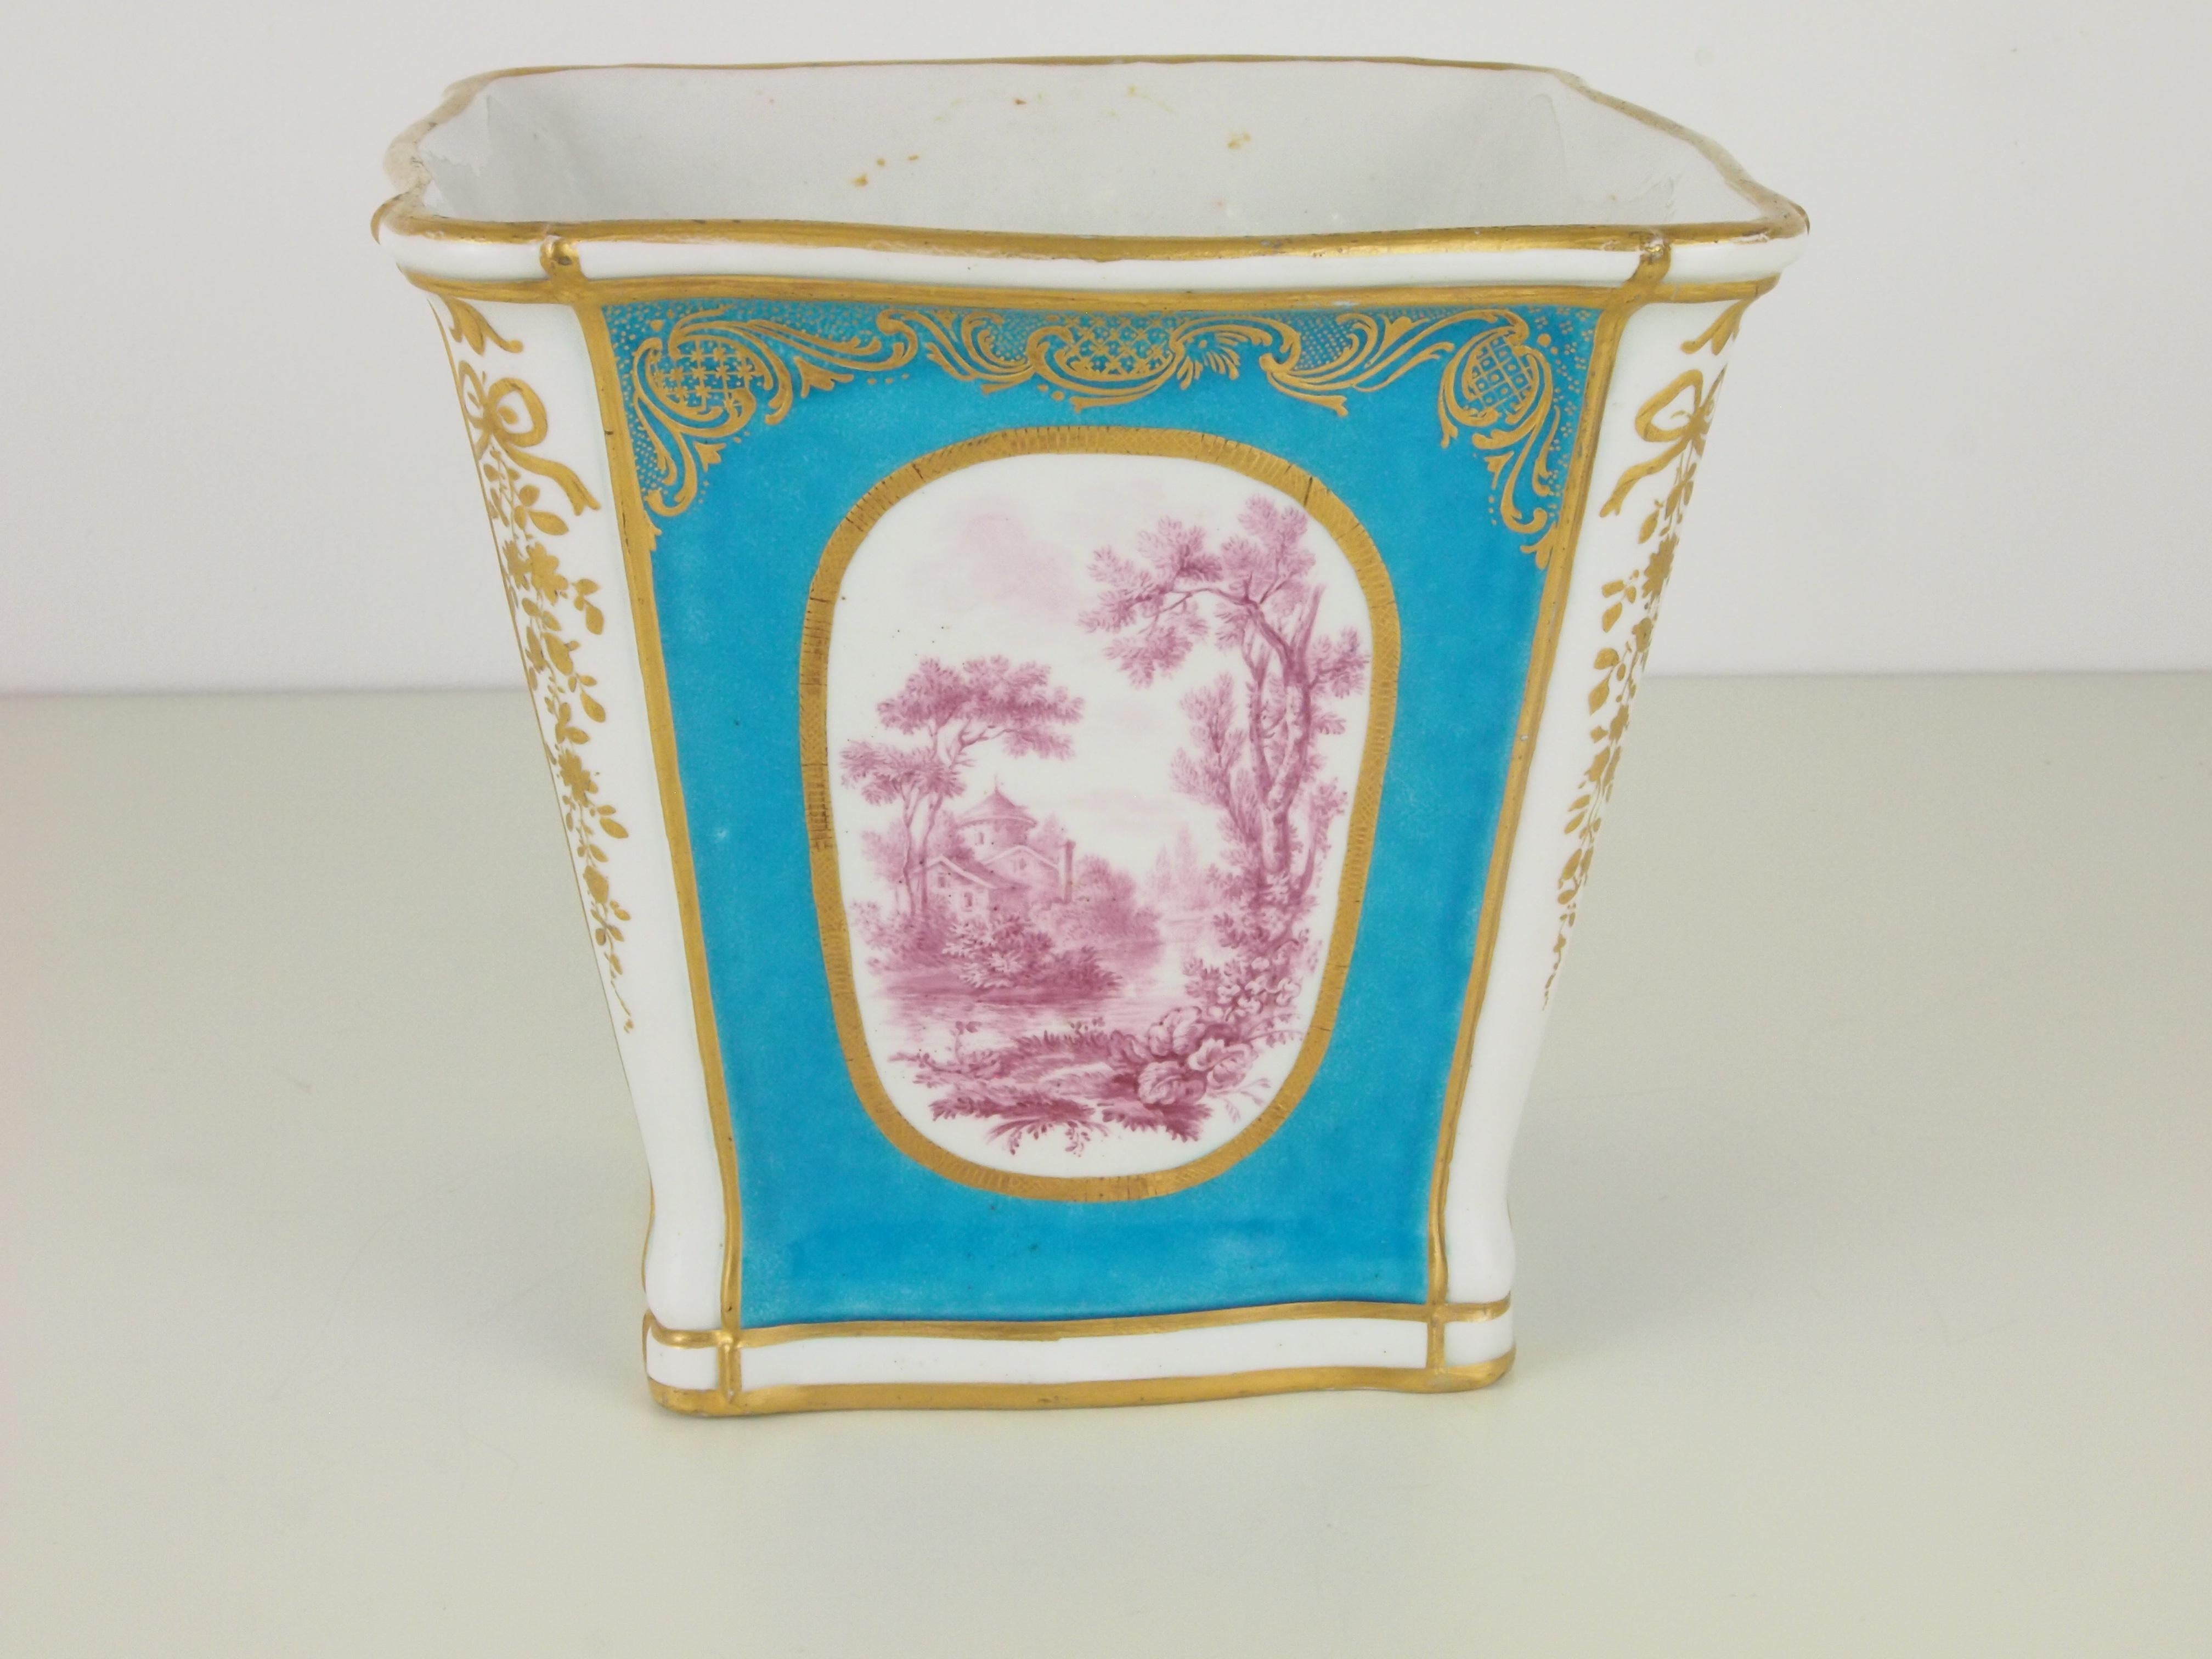 Antique Porcelain Cache Pot in Sevres Celestial Blue Style In Good Condition For Sale In Hilversum, Noord Holland